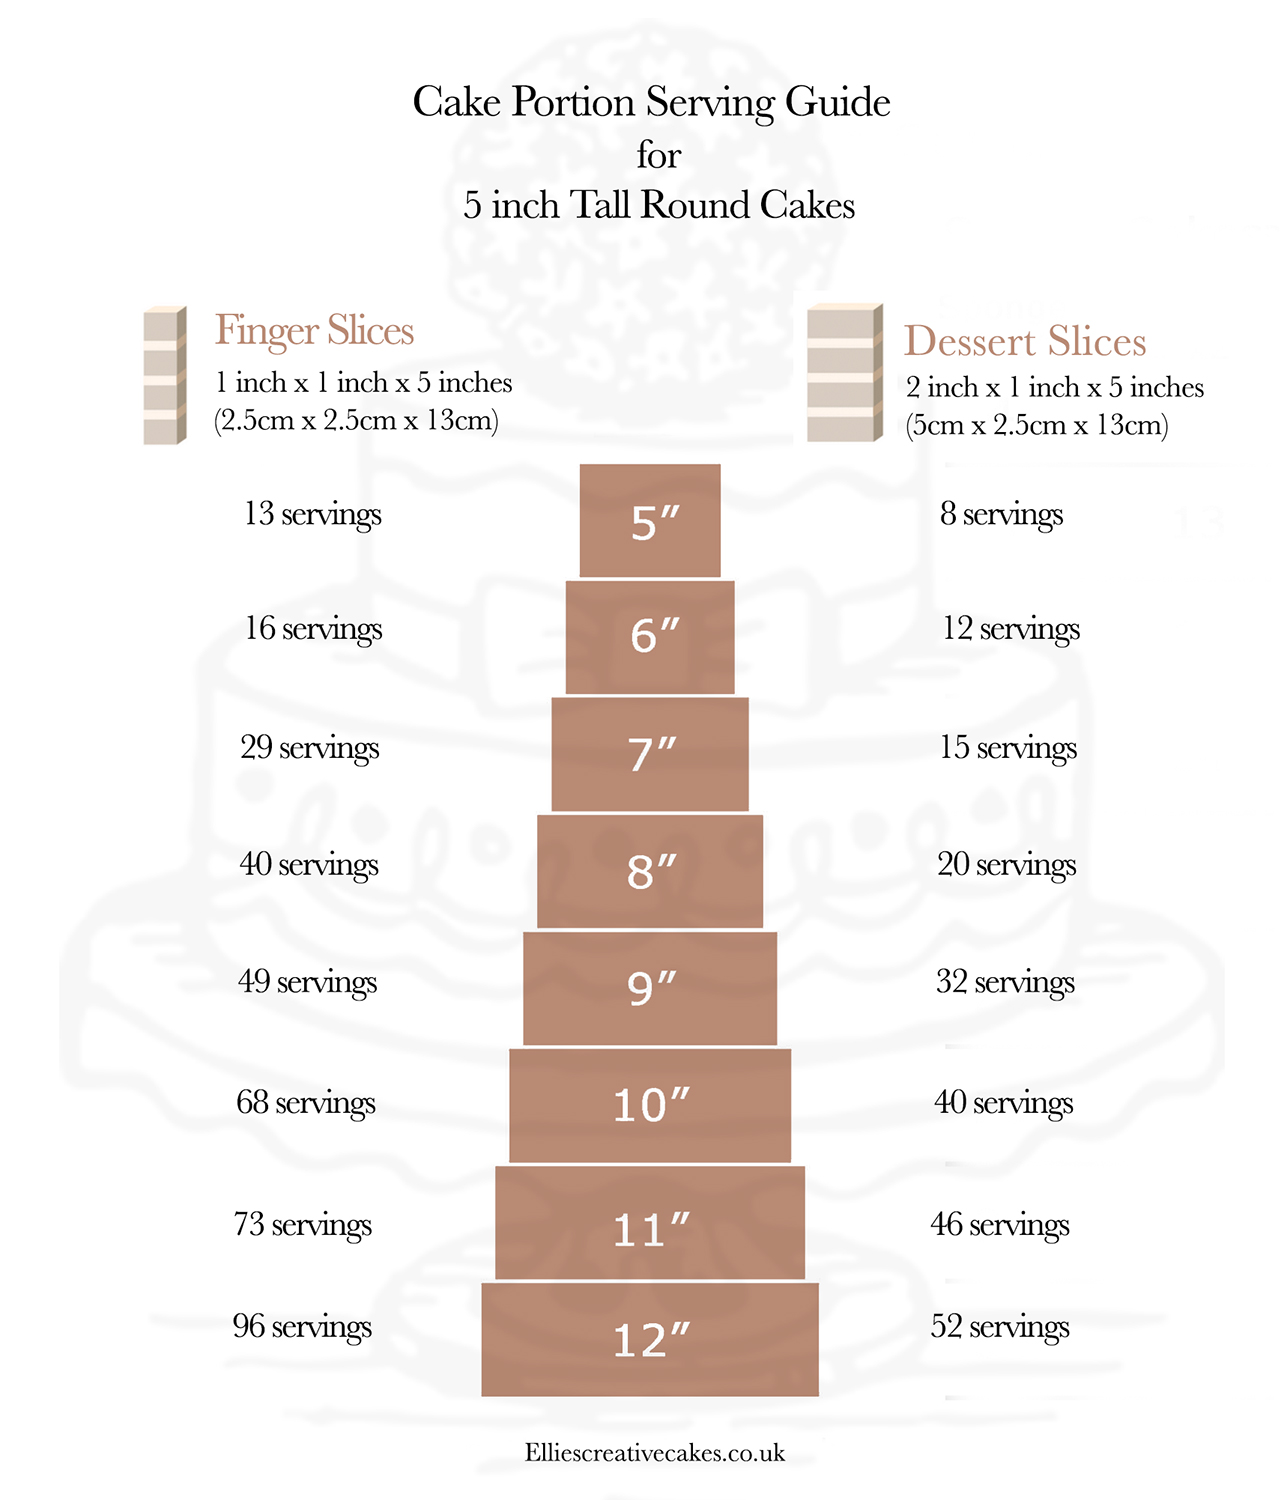 Guide showing approximate quantity of cake servings